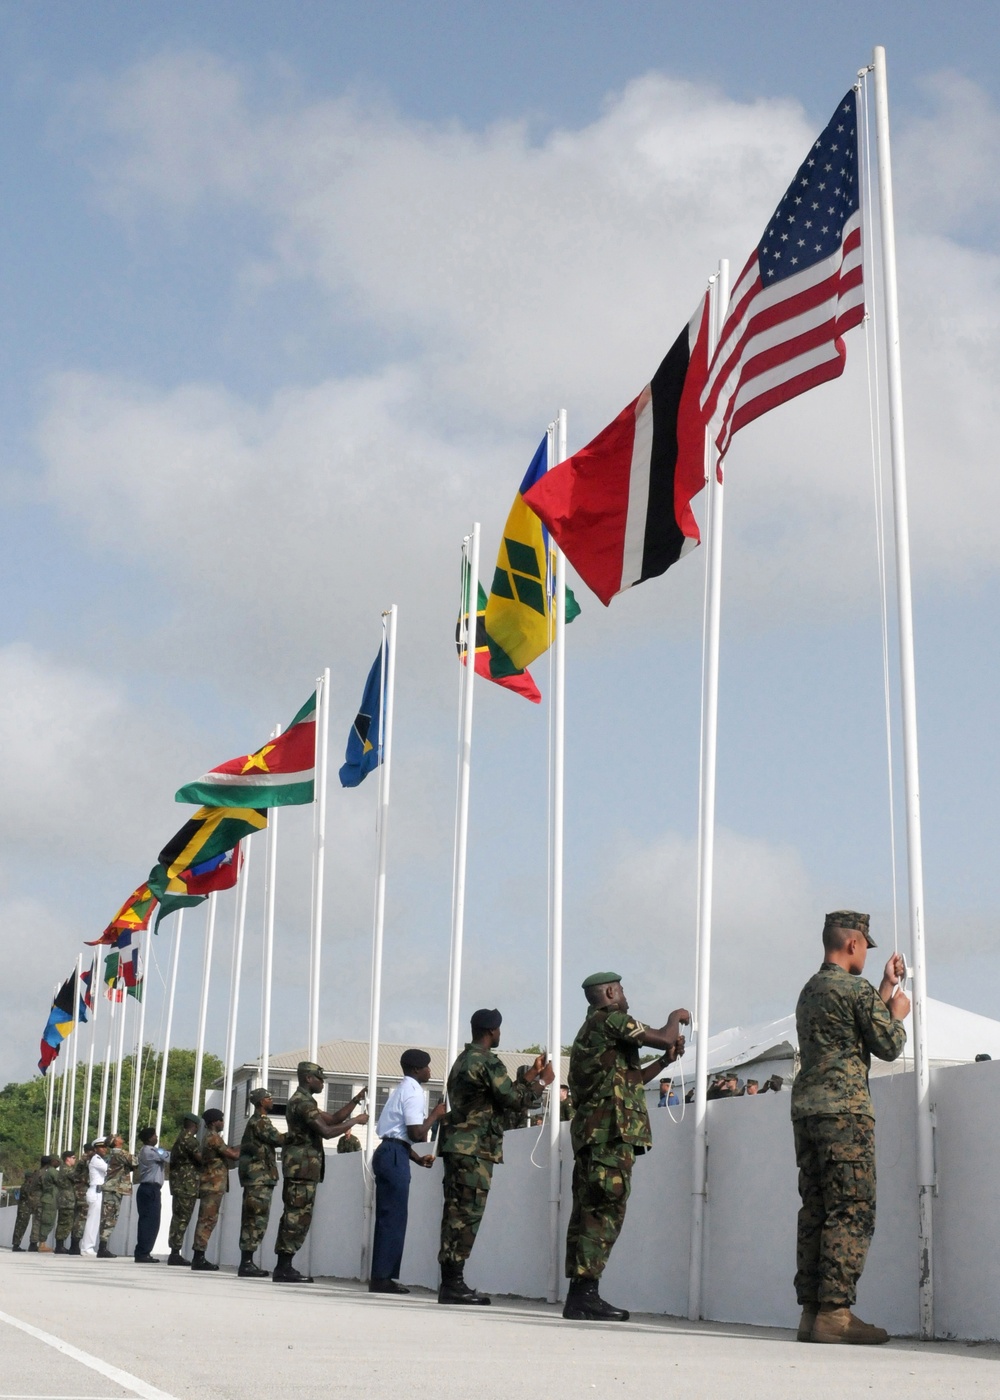 US and Partner Nations Unfurl their flags